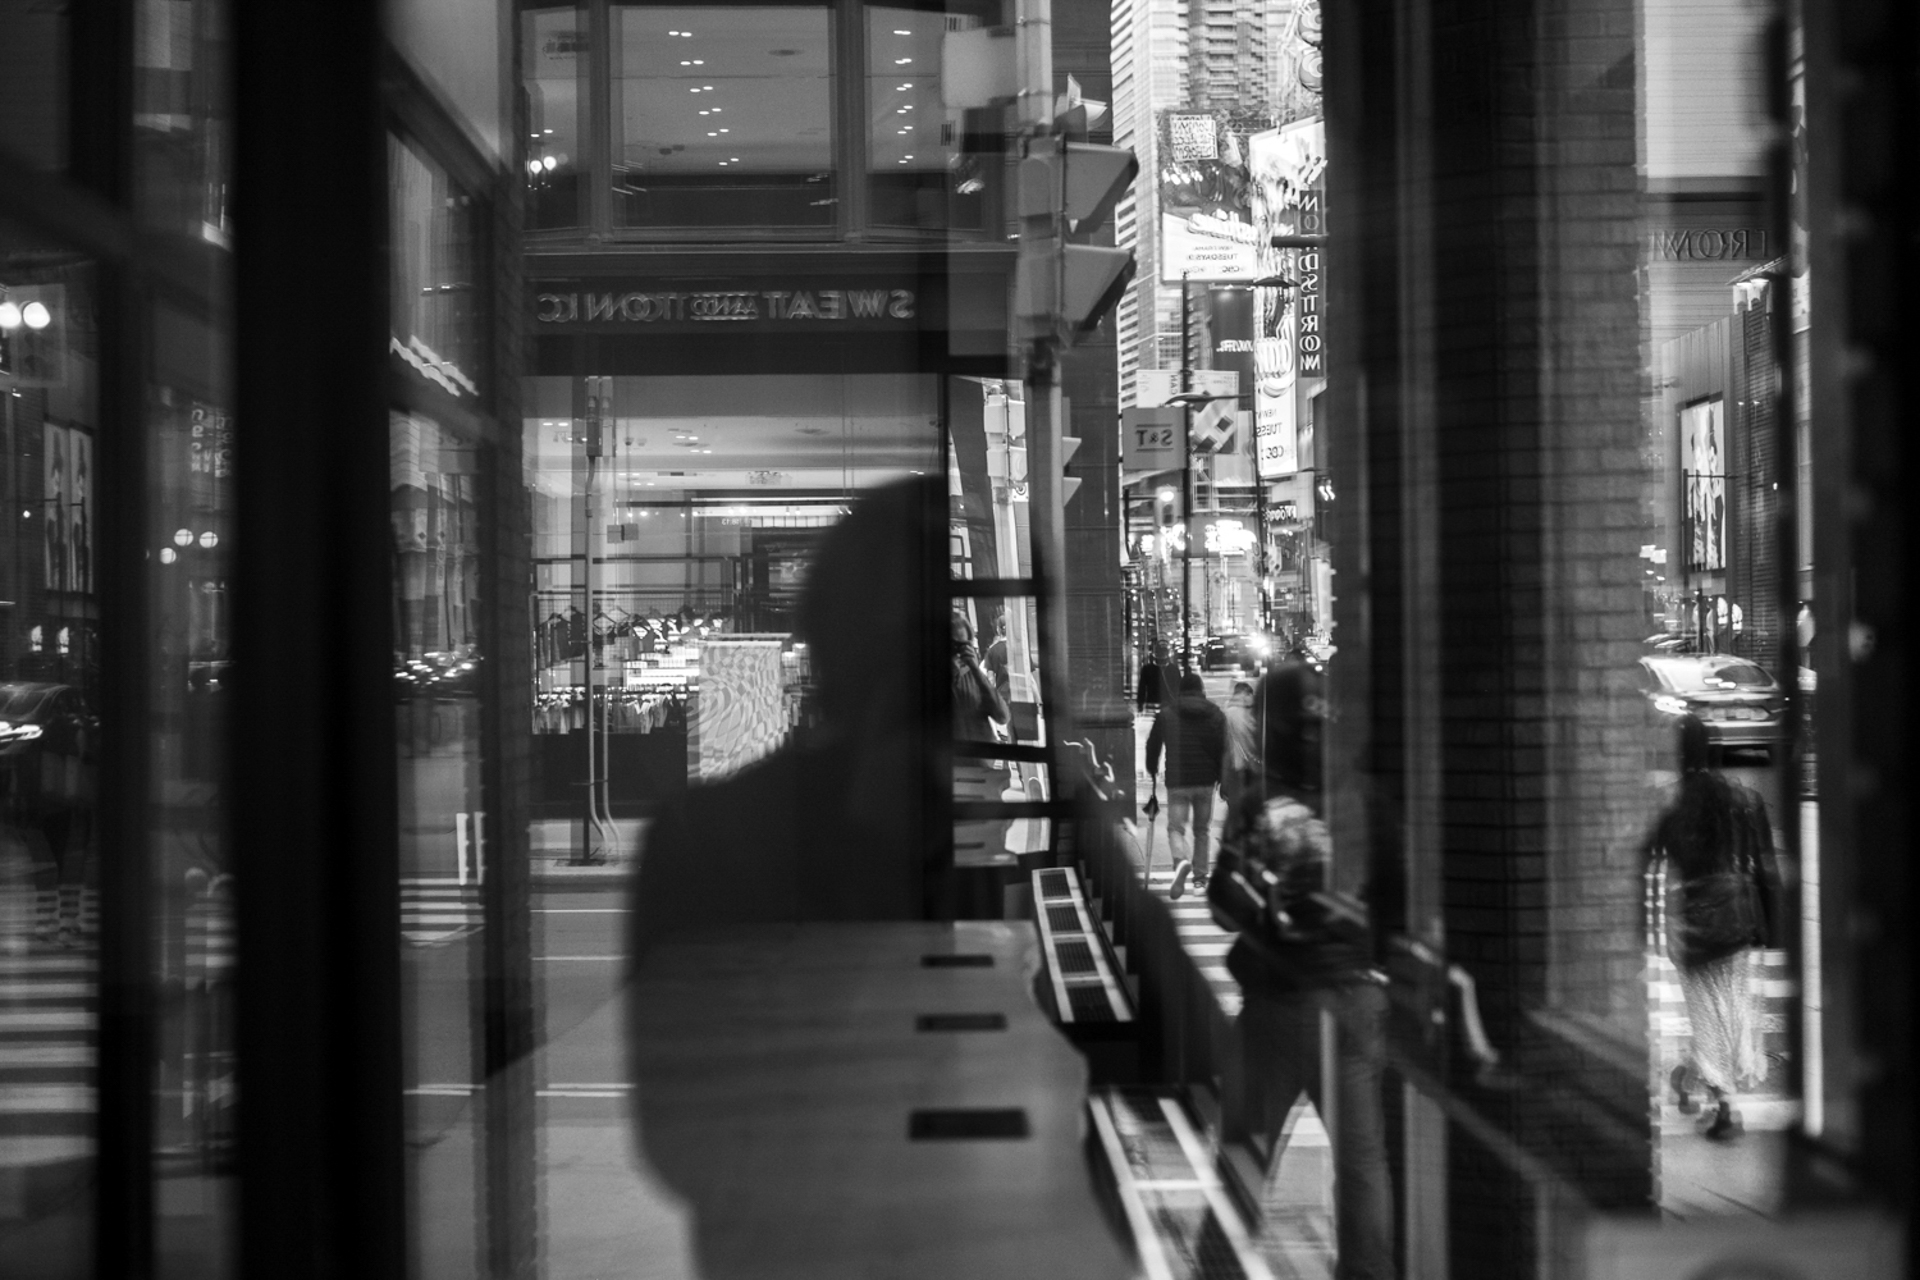 This photo consists of the reflection of a man’s silhouette and the streetscape with several moving people and cars on the right side of the photo.